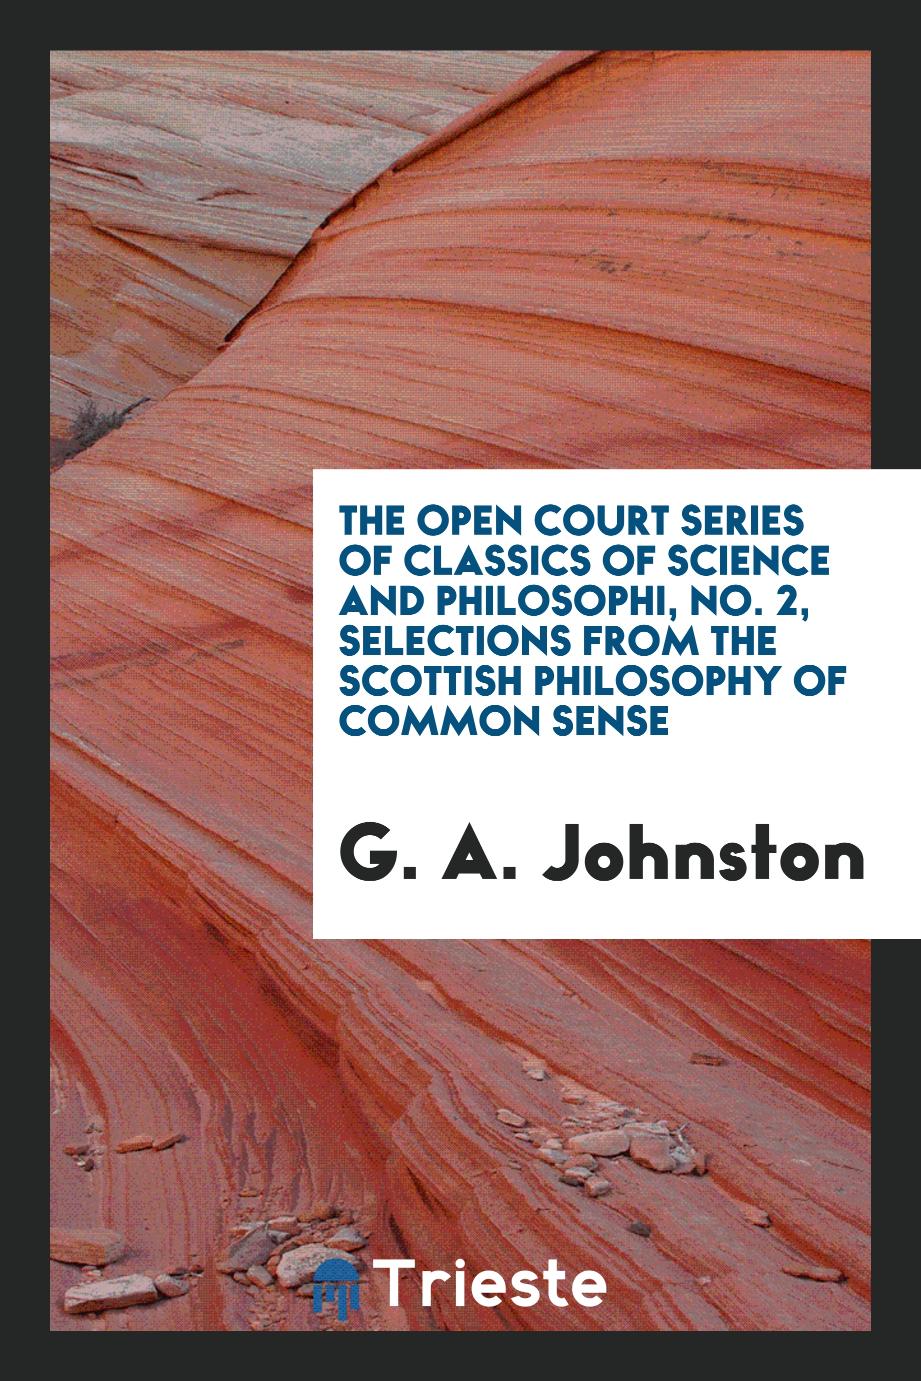 The open court series of classics of science and philosophi, No. 2, Selections from the Scottish philosophy of common sense